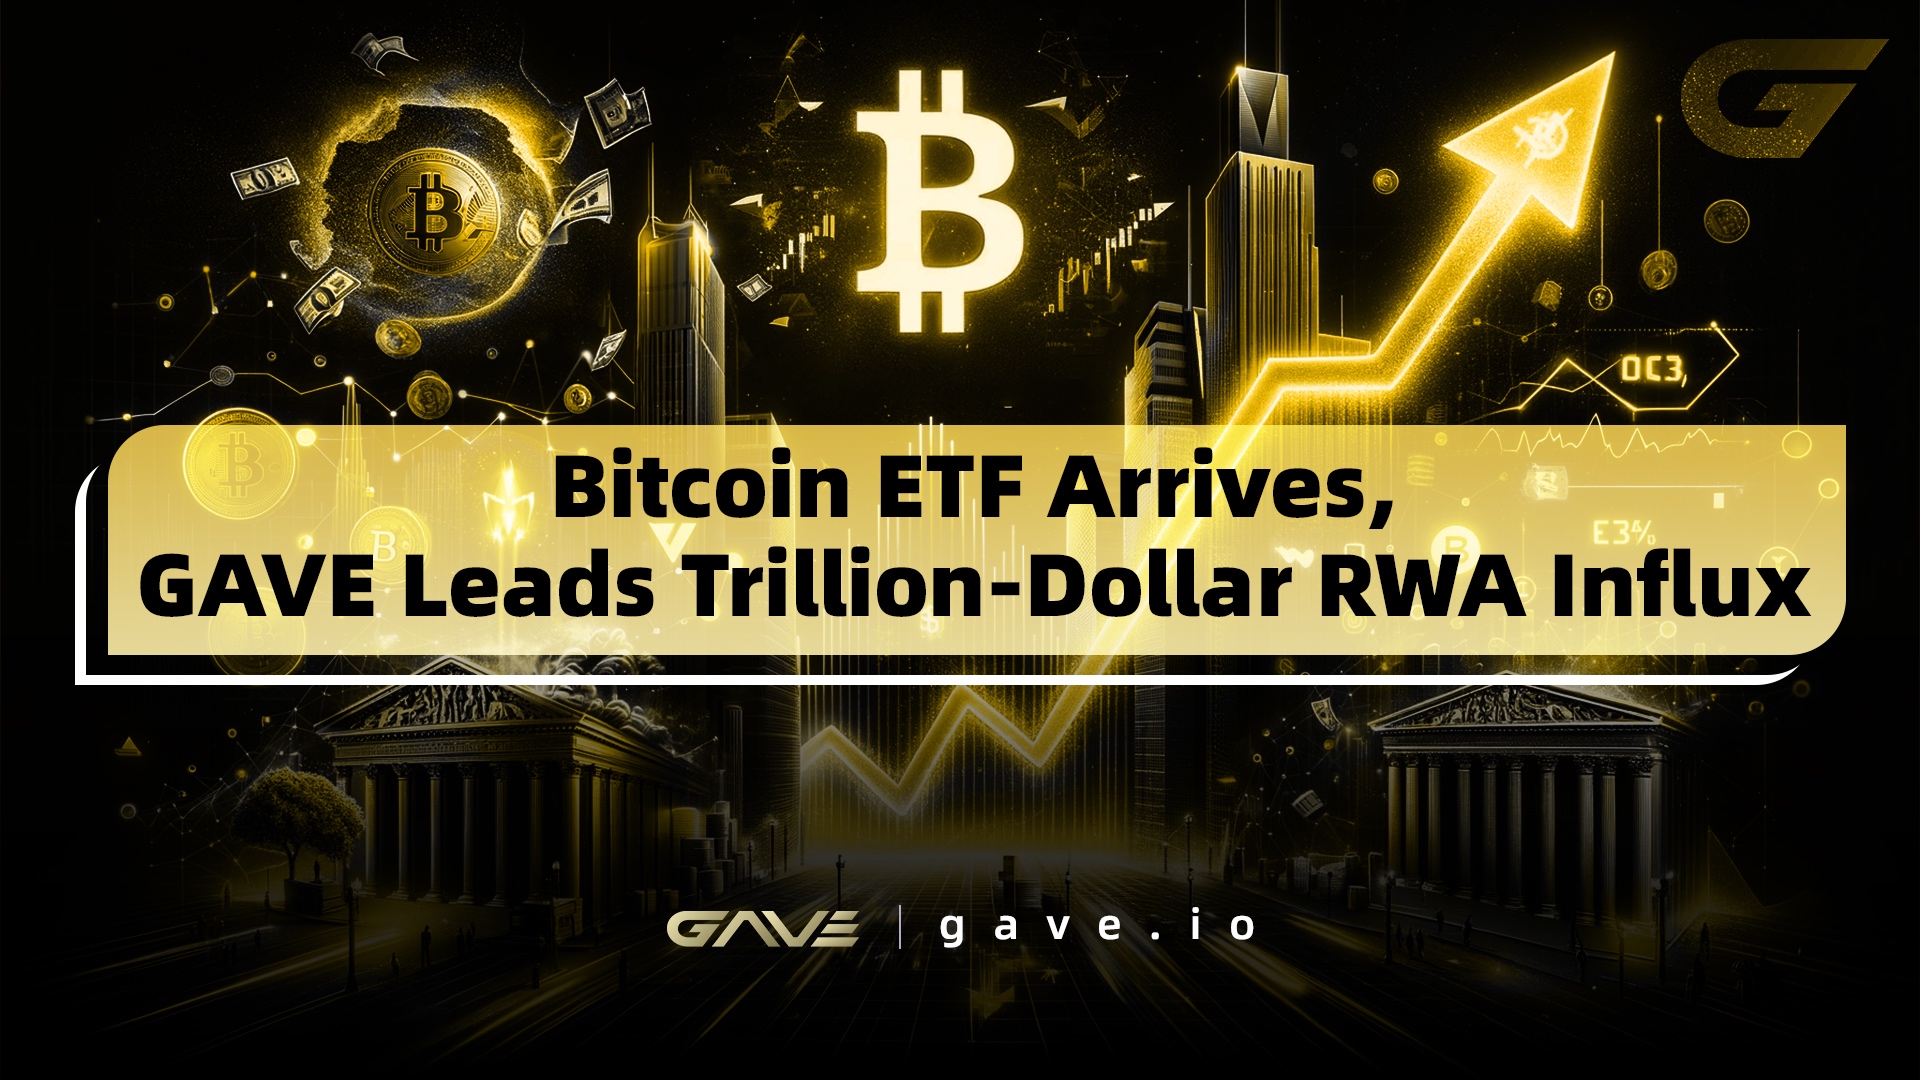 Bitcoin ETF Incoming, Trillions of Funds to Flow into RWAs, GAVE Public Chain Uniquely Leads the Pack